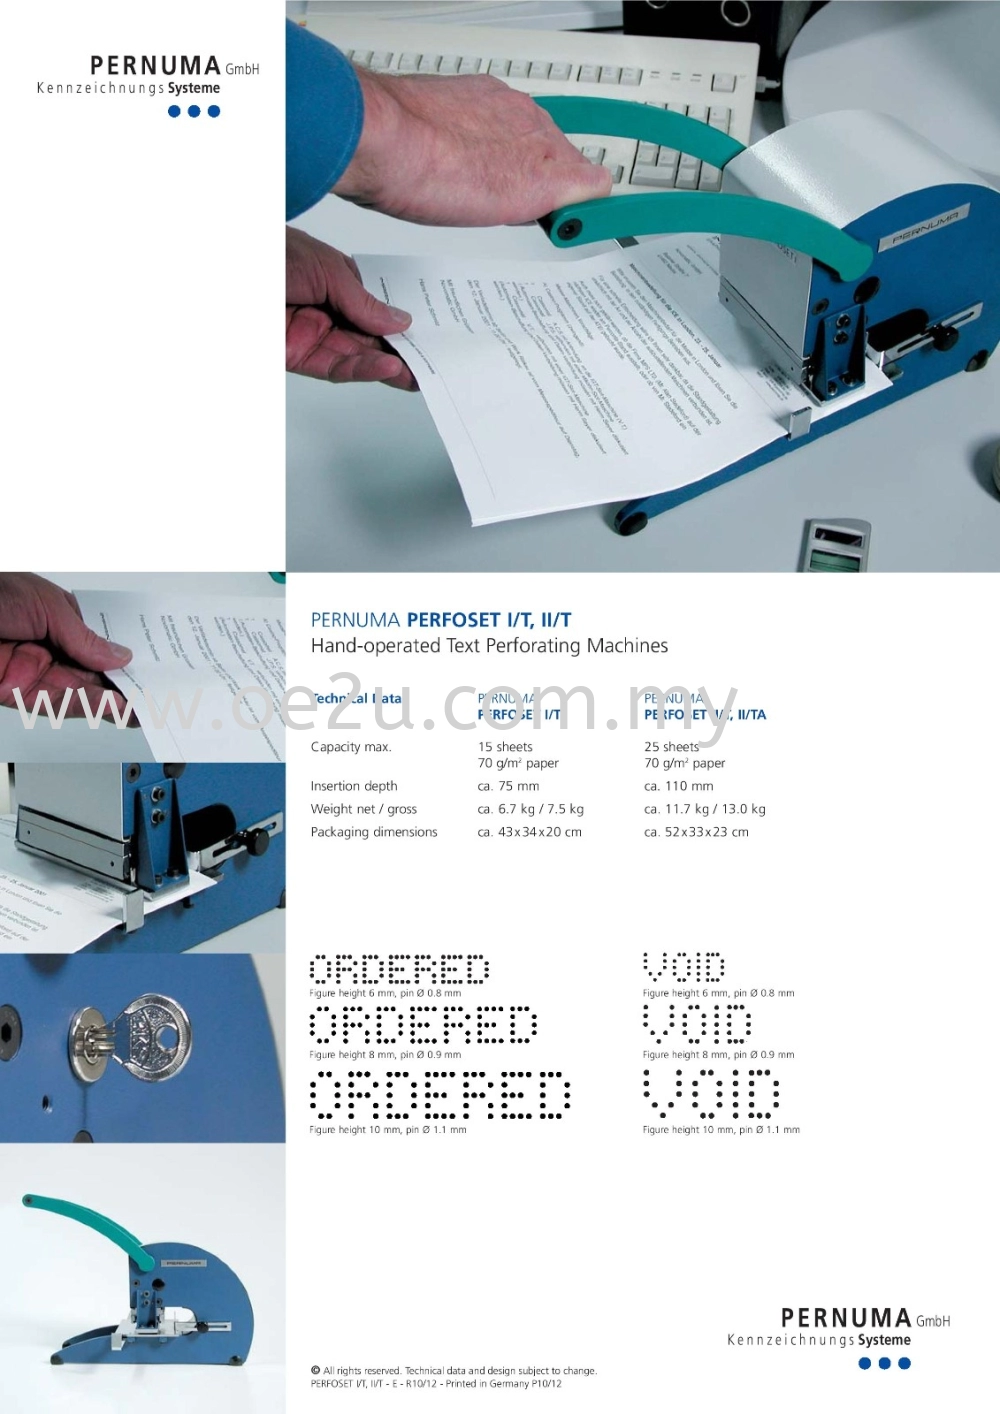 PERNUMA Perfoset I/T - 1 Line Manual Text Perforator (Made in Germany)